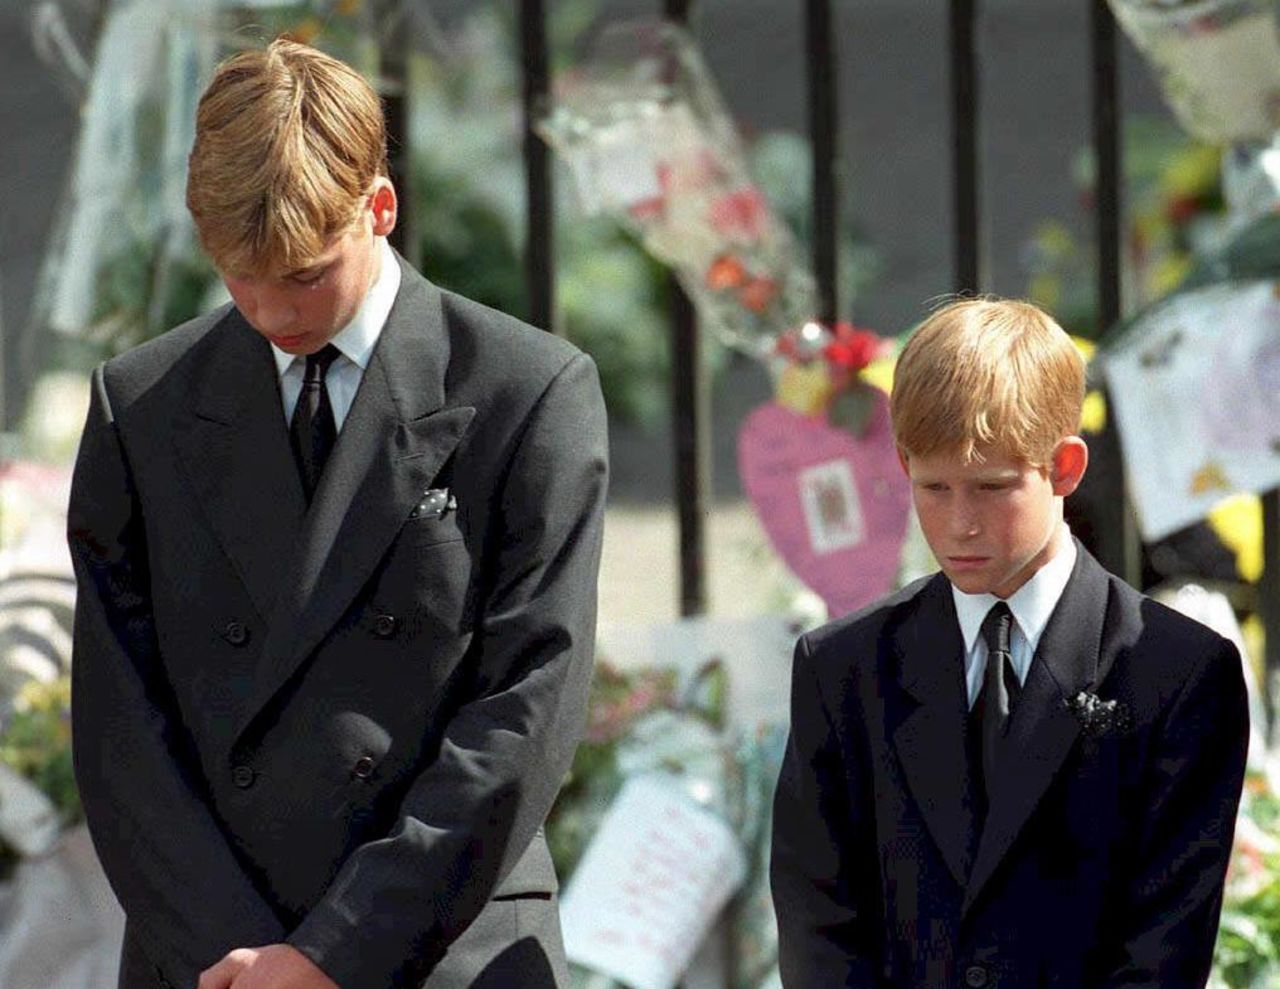 September 1997: Prince William and Prince Harry bow their heads as the coffin carrying their mother Diana is taken out of Westminster Abbey.